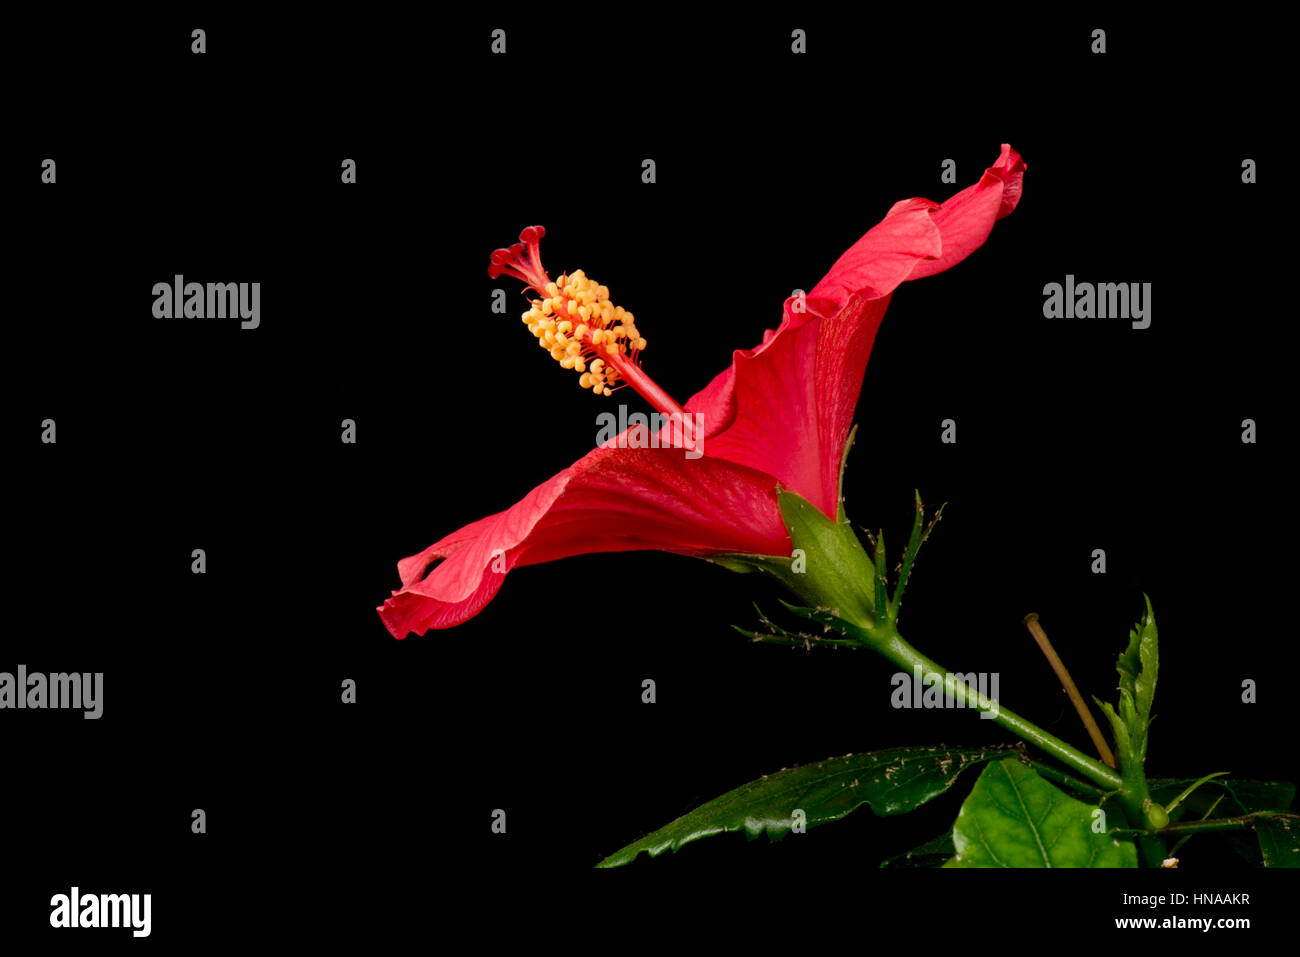 Flower bud of red Hibiscus rosa-sinensis sequence opening to reveal anthers, stigma, style and other reproductive parts Stock Photo